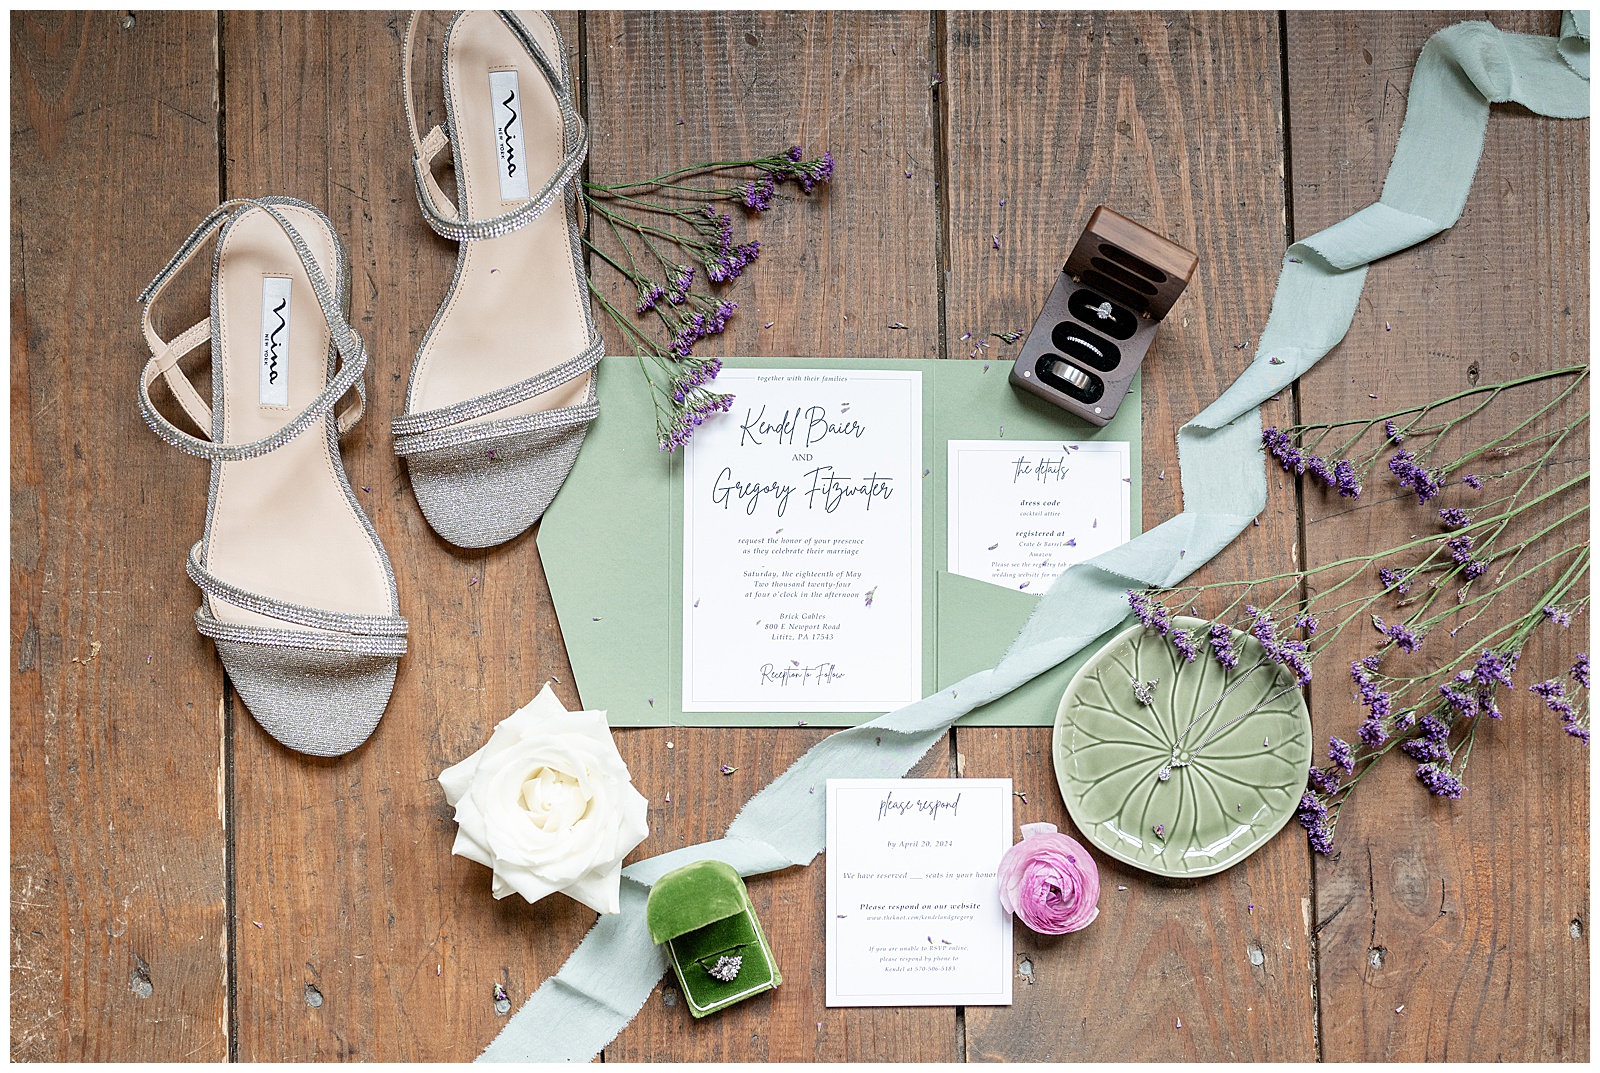 bridal details like invitation, ring boxes, bride's shoes and more on display on wood floor at brick gables